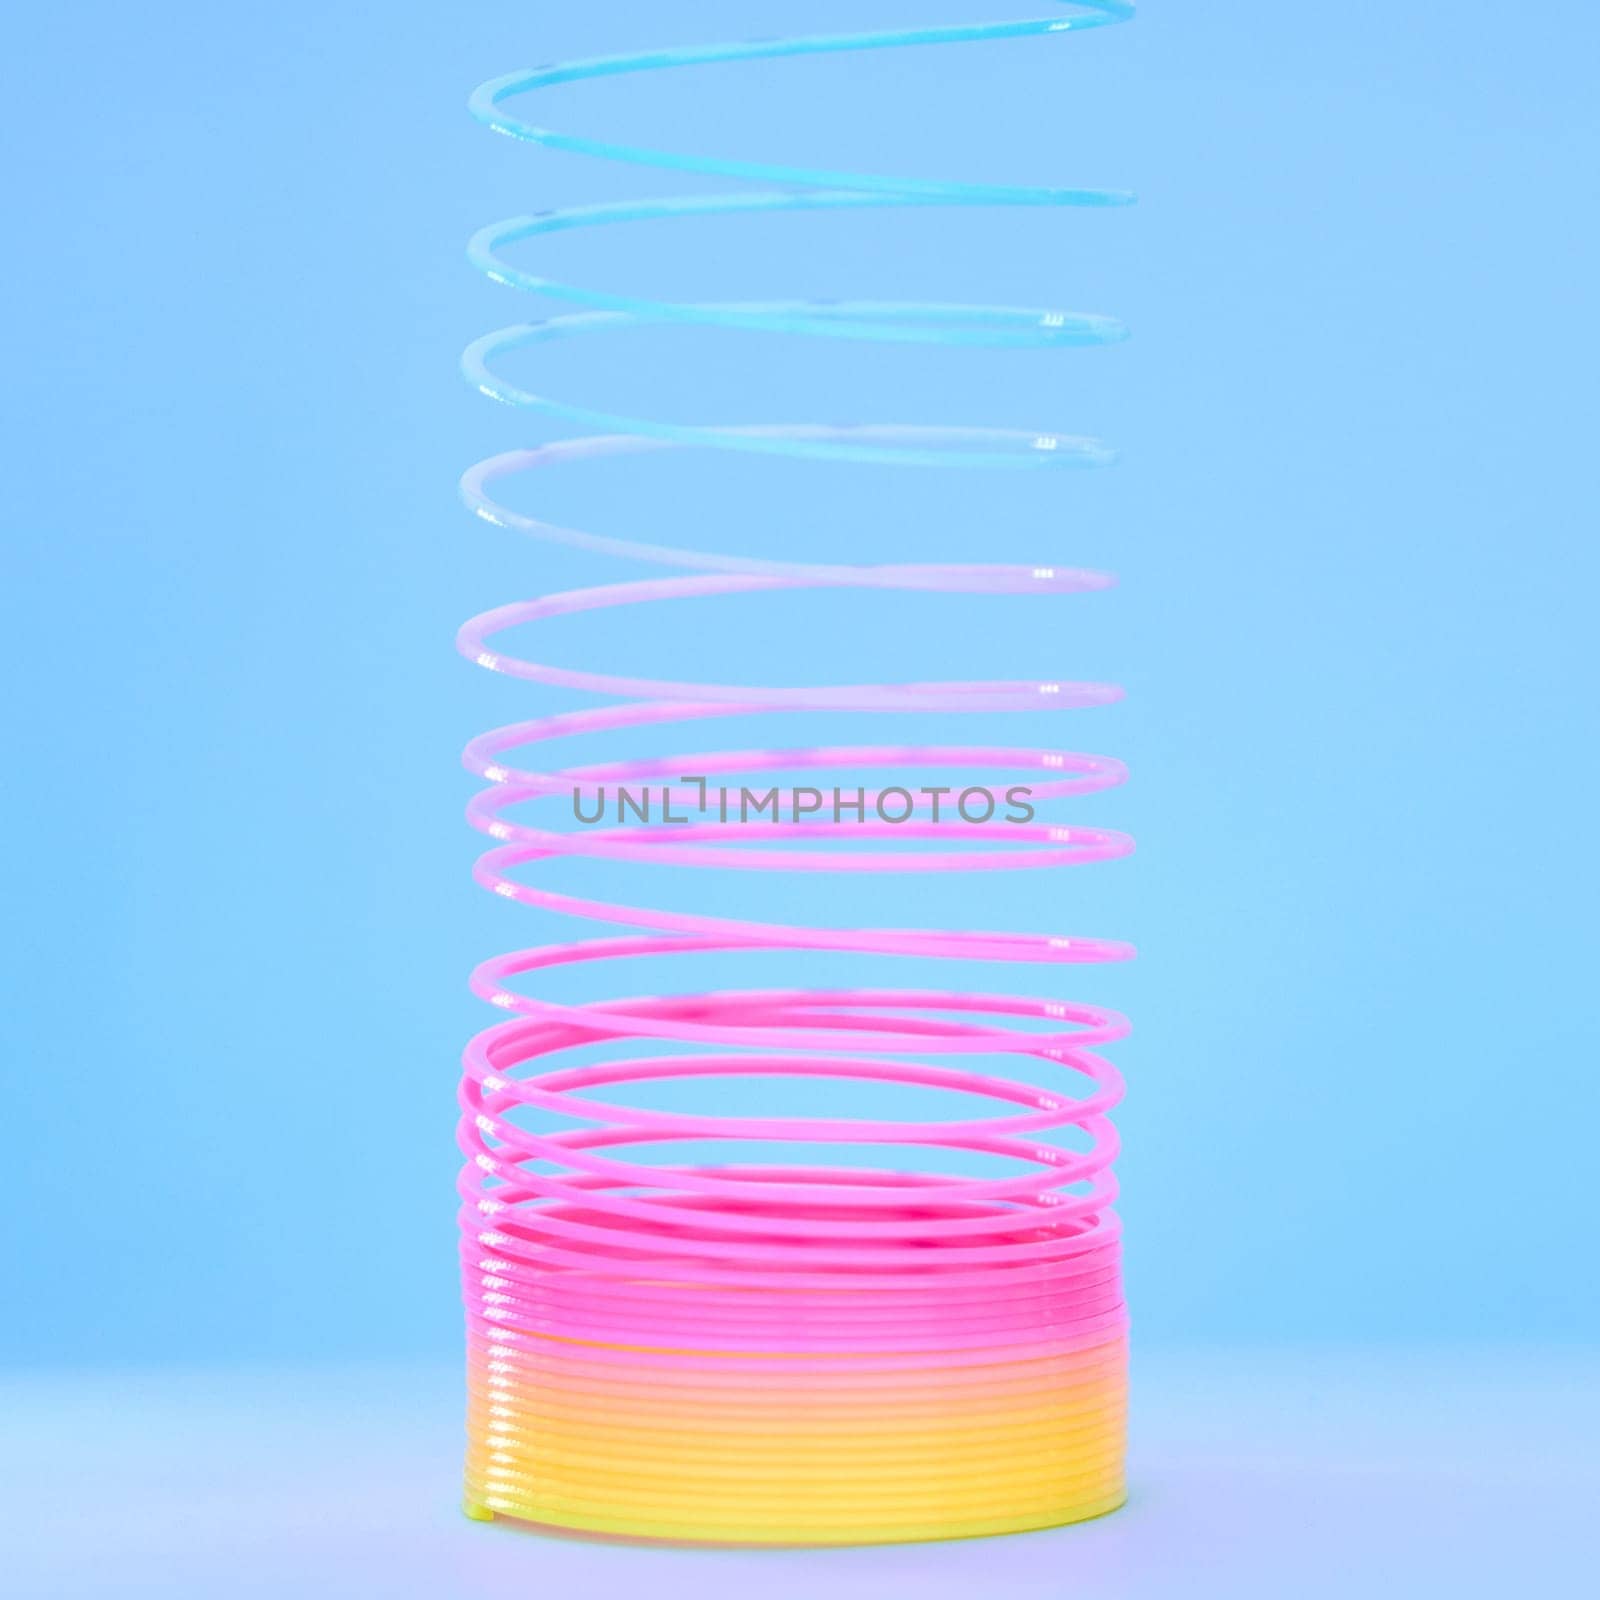 Rainbow slinky toy, spring and plastic product in studio isolated against a blue background mockup. Flexible toys, colorful spirals and childhood item stretched out for playing, having fun and games. by YuriArcurs